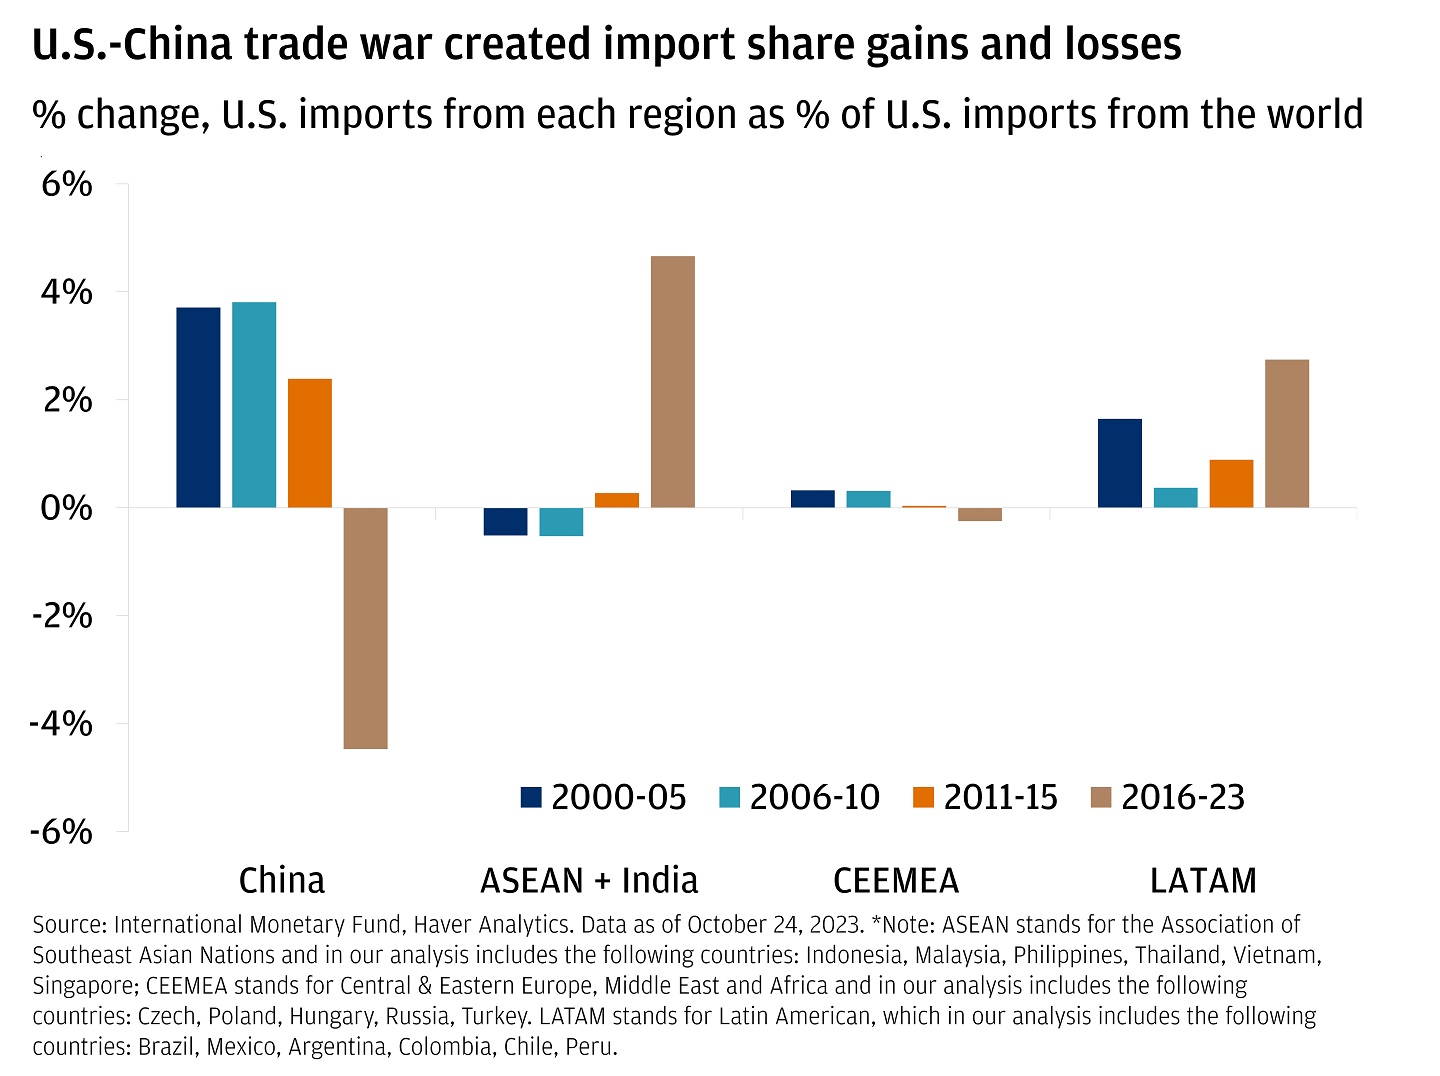 This bar graph describes U.S. import share gains and losses by countries from 2000 to 2023.